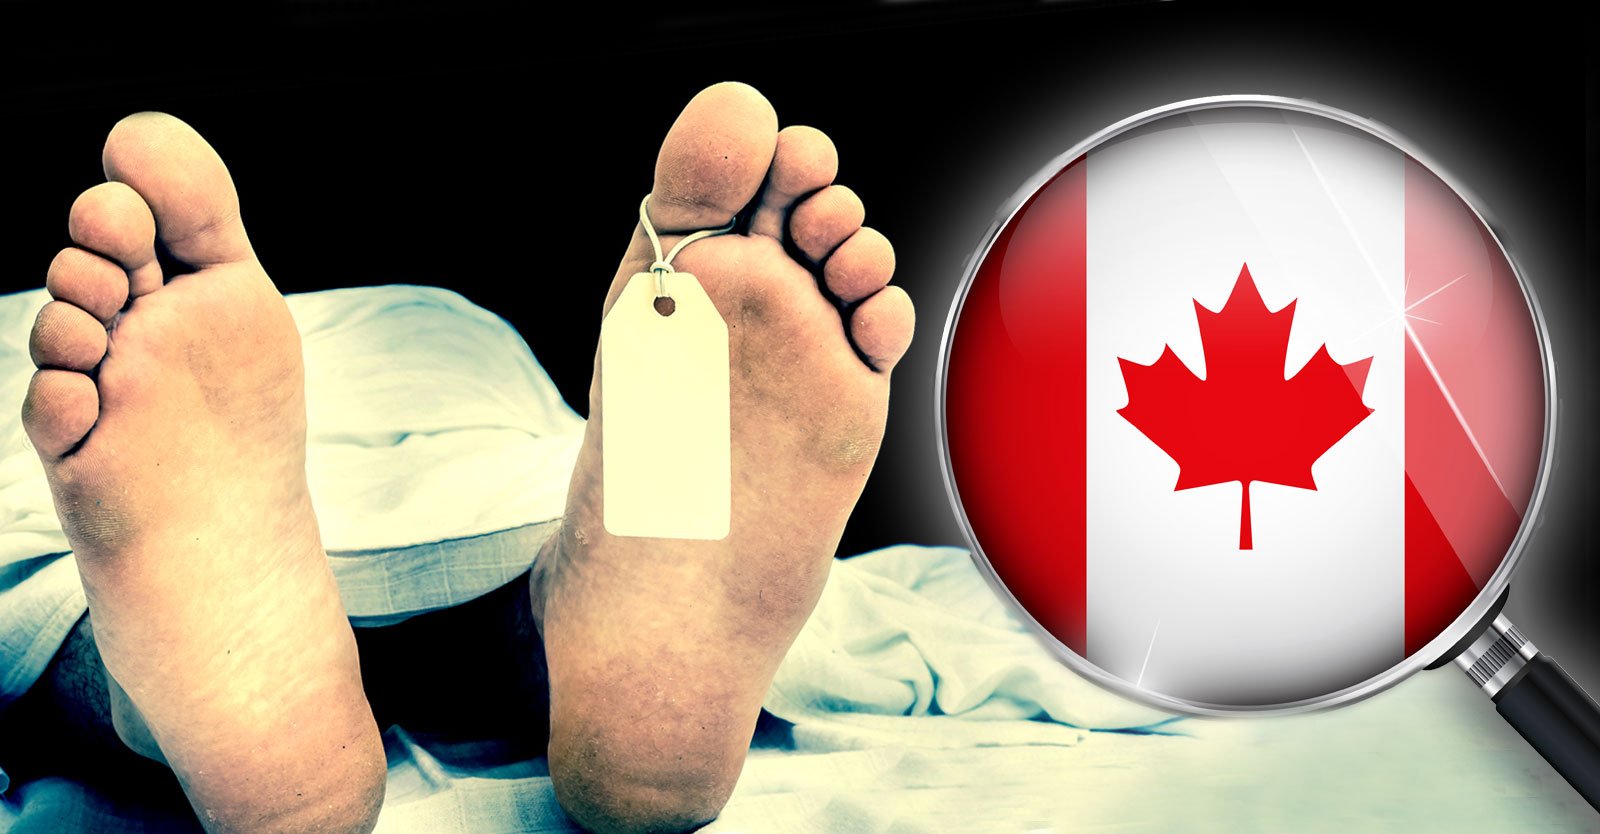 Canada Reports 300% Increase In ‘Unspecified Causes’ Of Death, Sparking Calls For Investigation